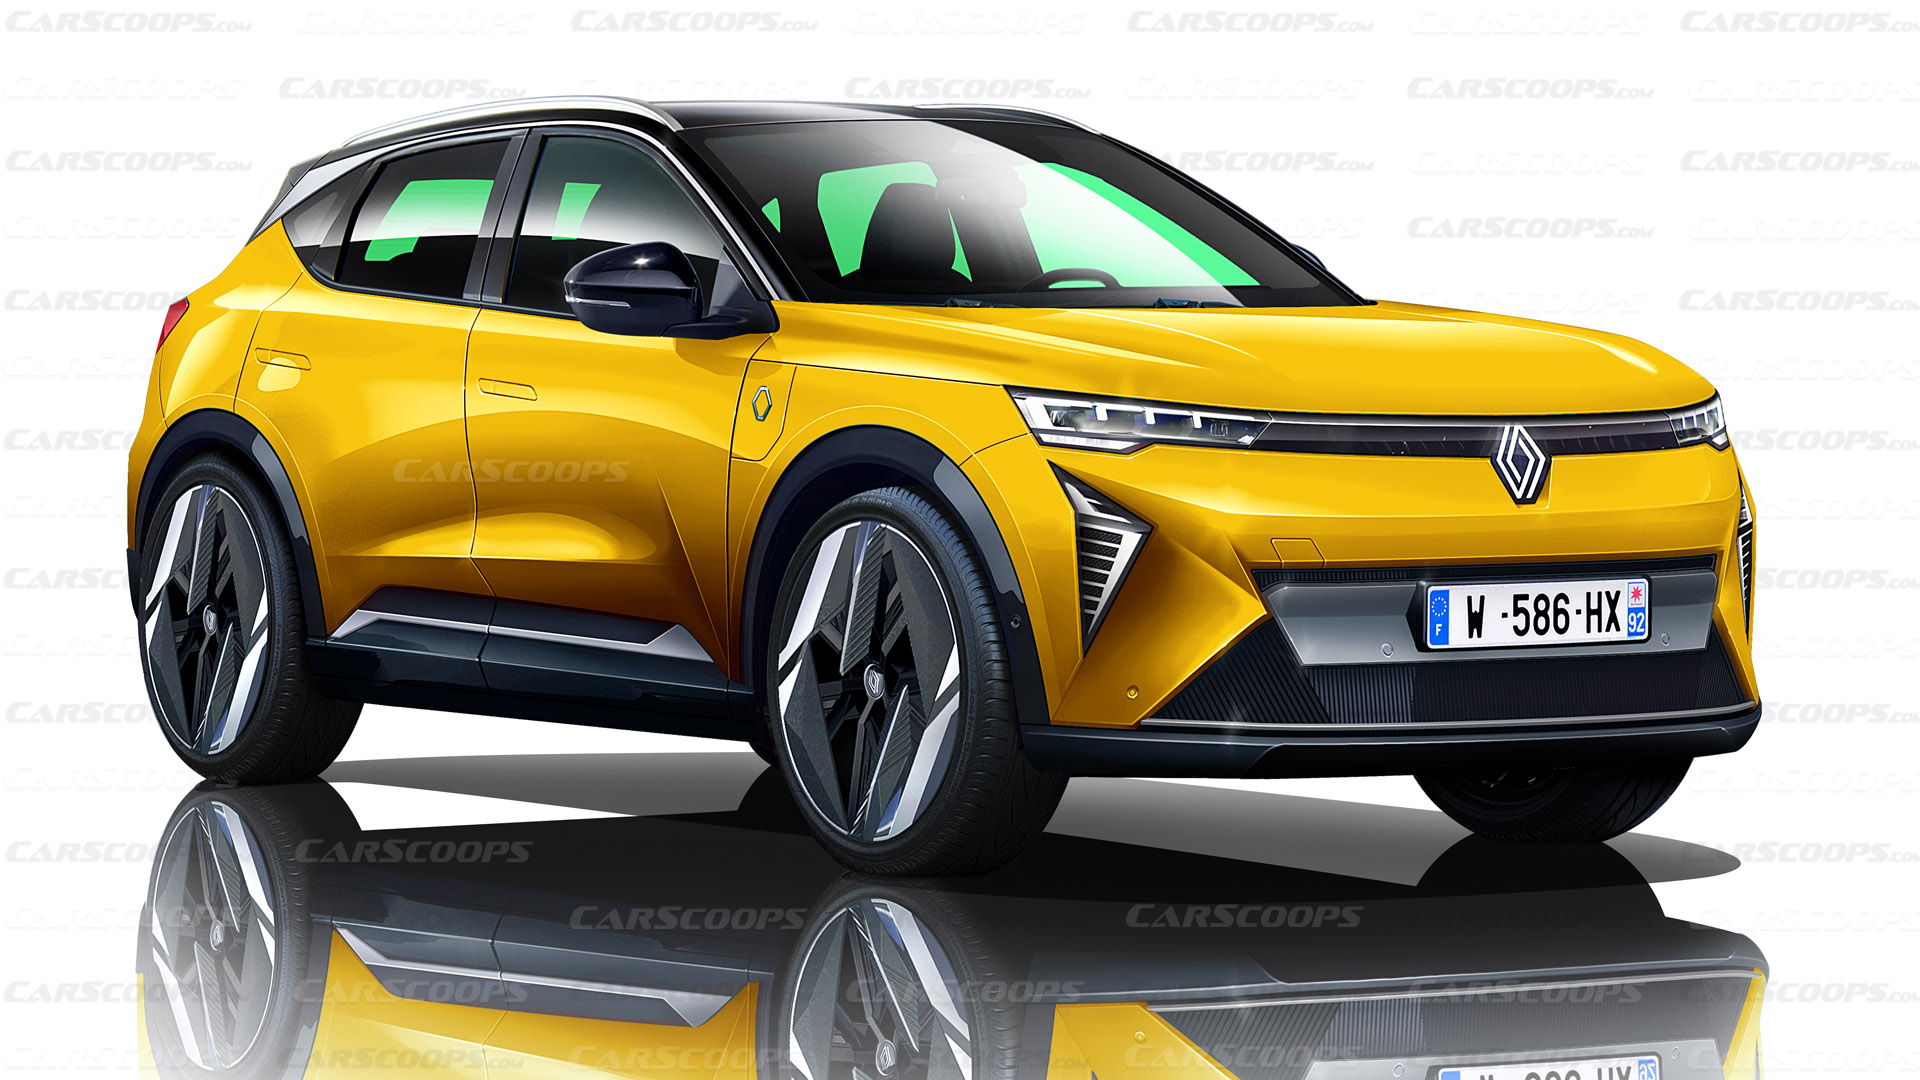 New Renault Scenic E-Tech revealed: everything we know so far